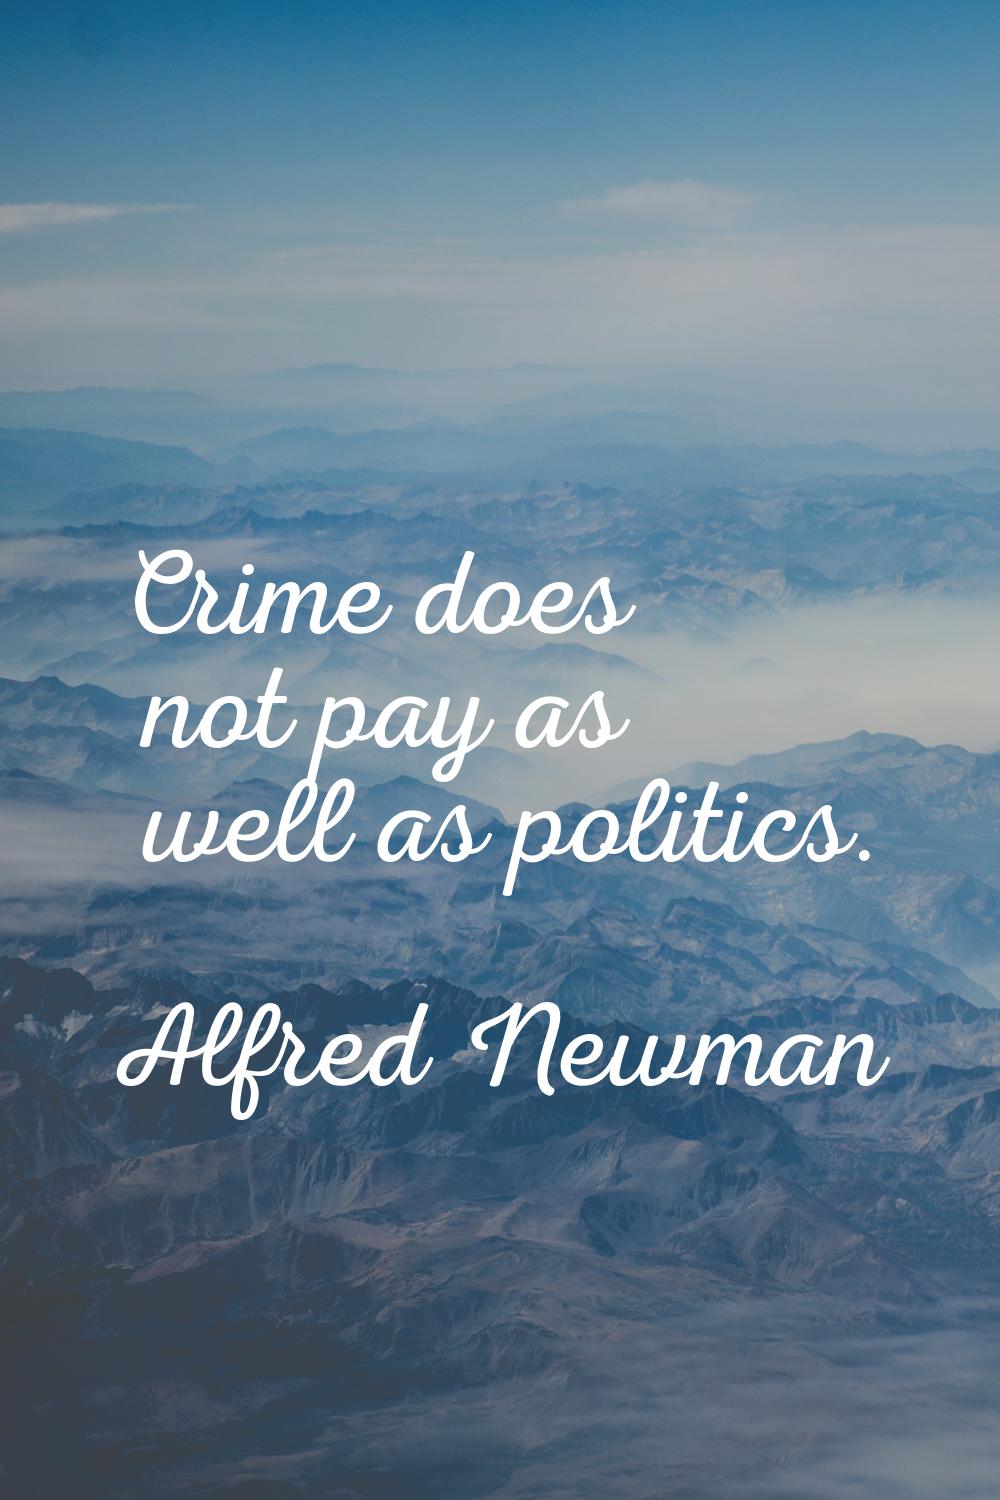 Crime does not pay as well as politics.